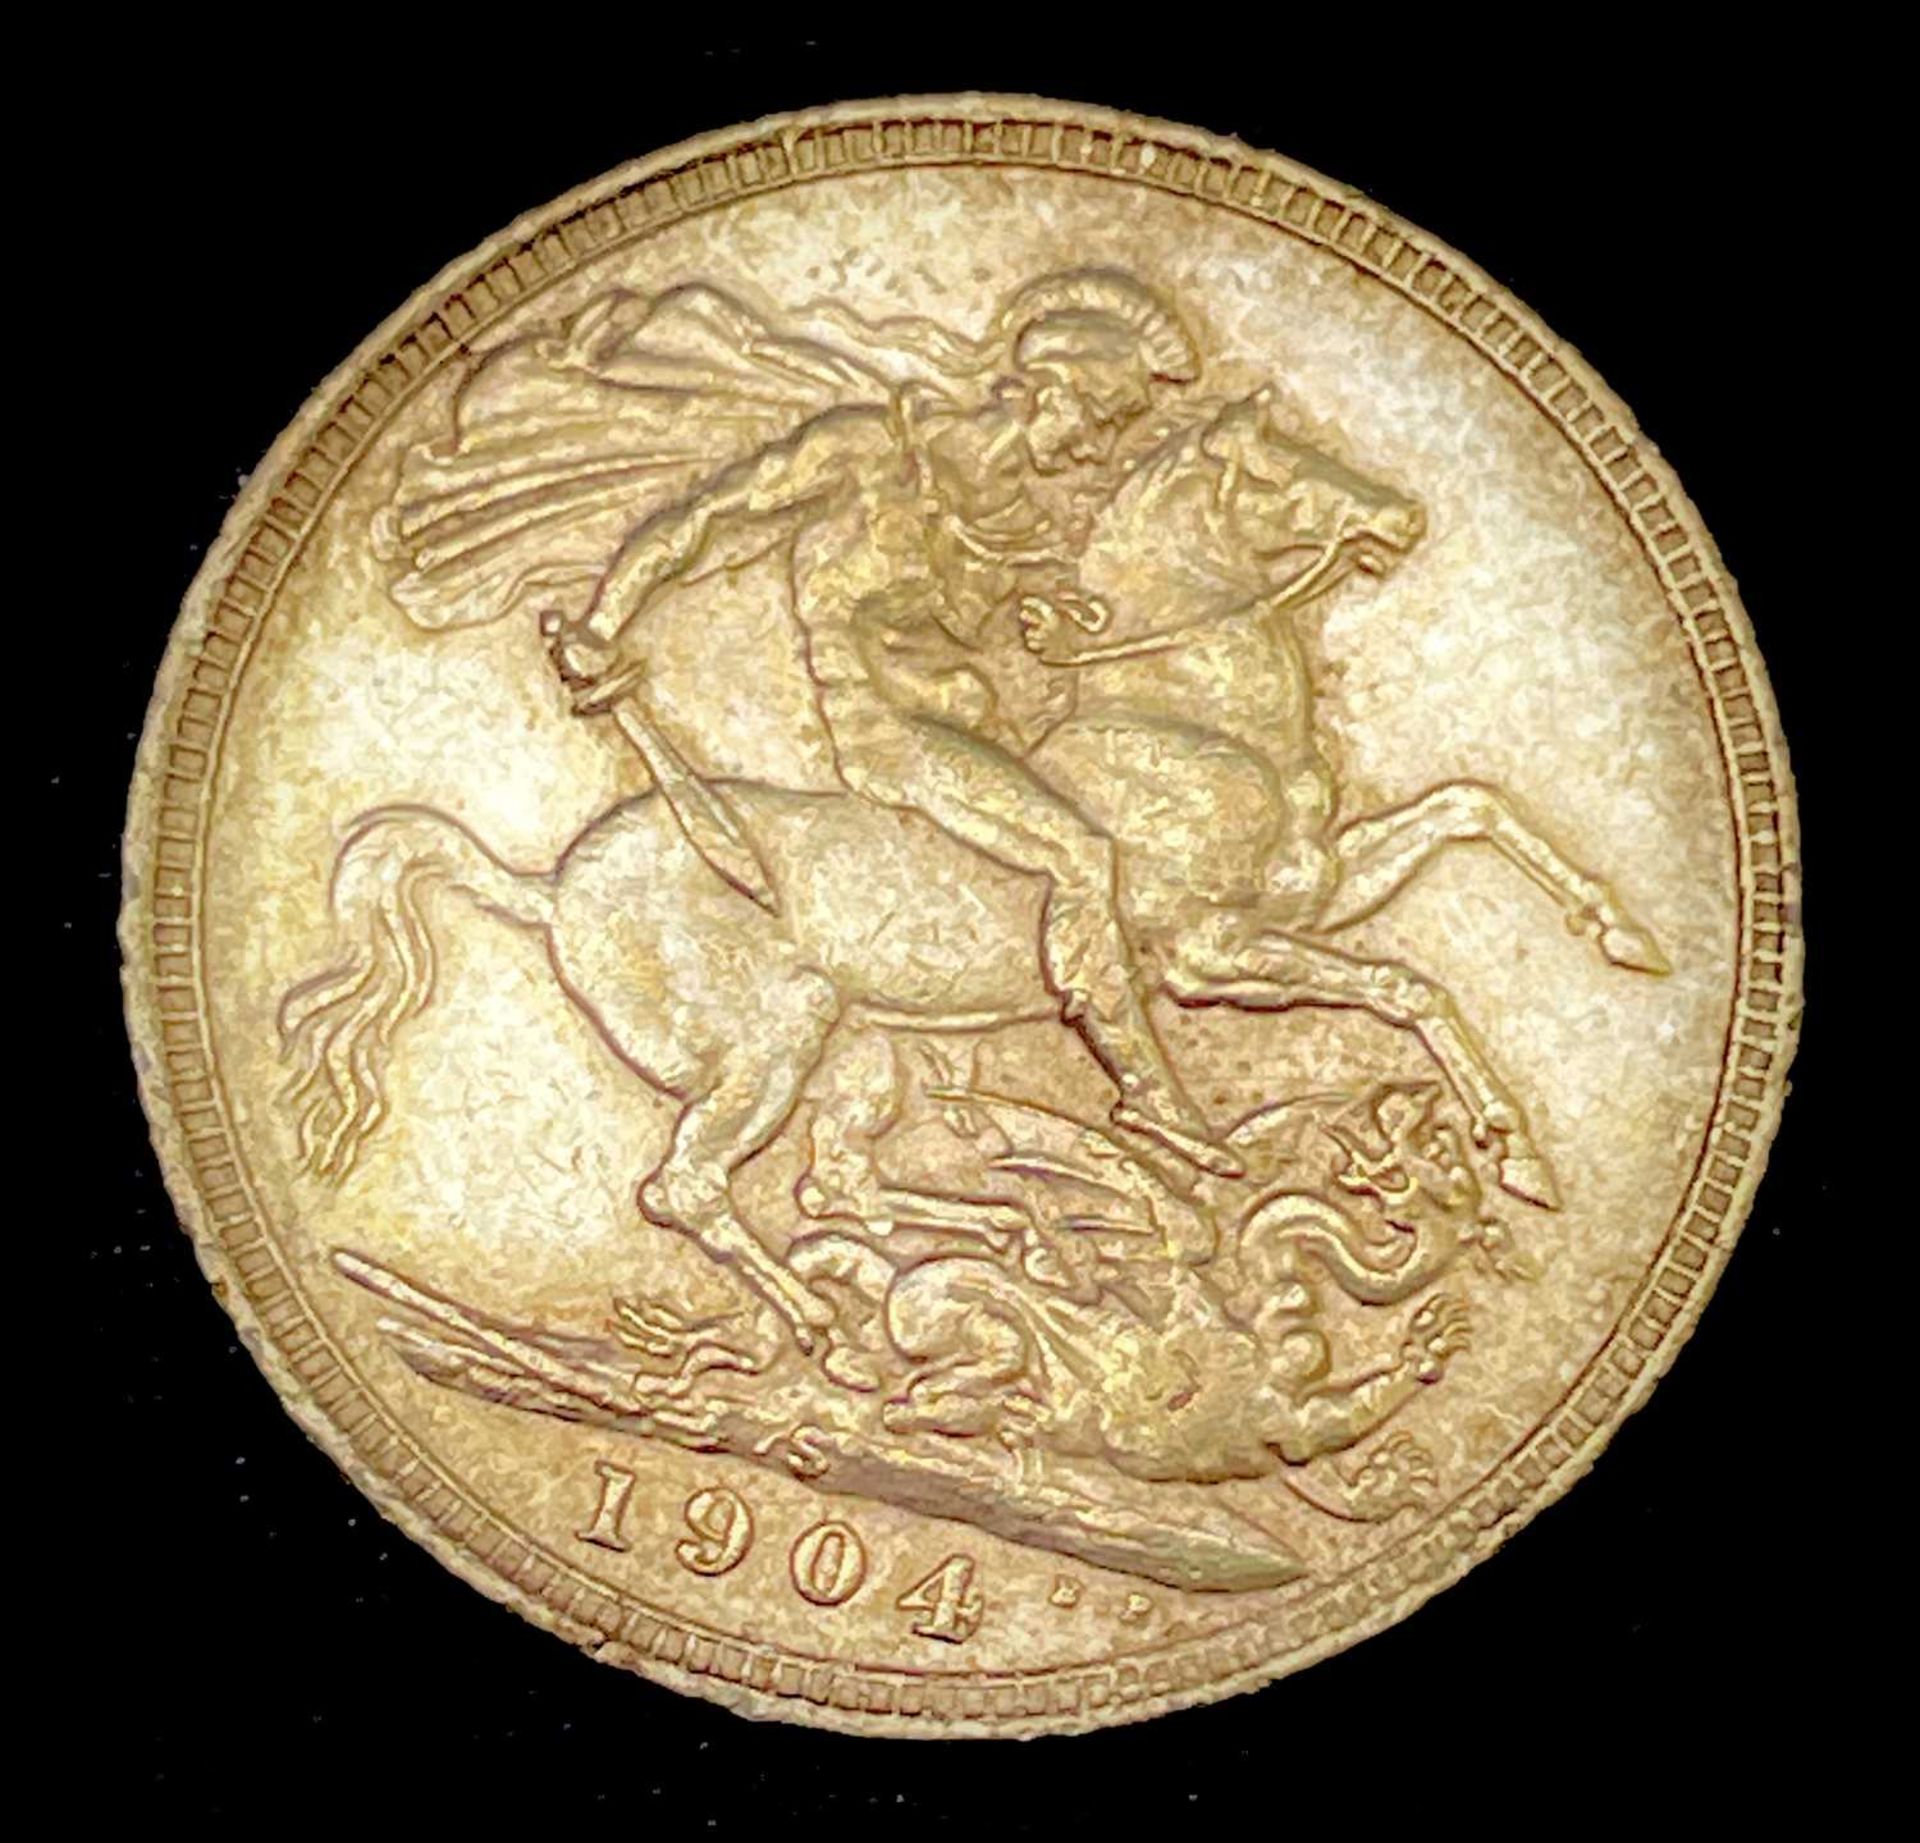 Great Britain Gold Sovereign 1904 Edward VII. Sydney Mint mark Condition: please request a condition